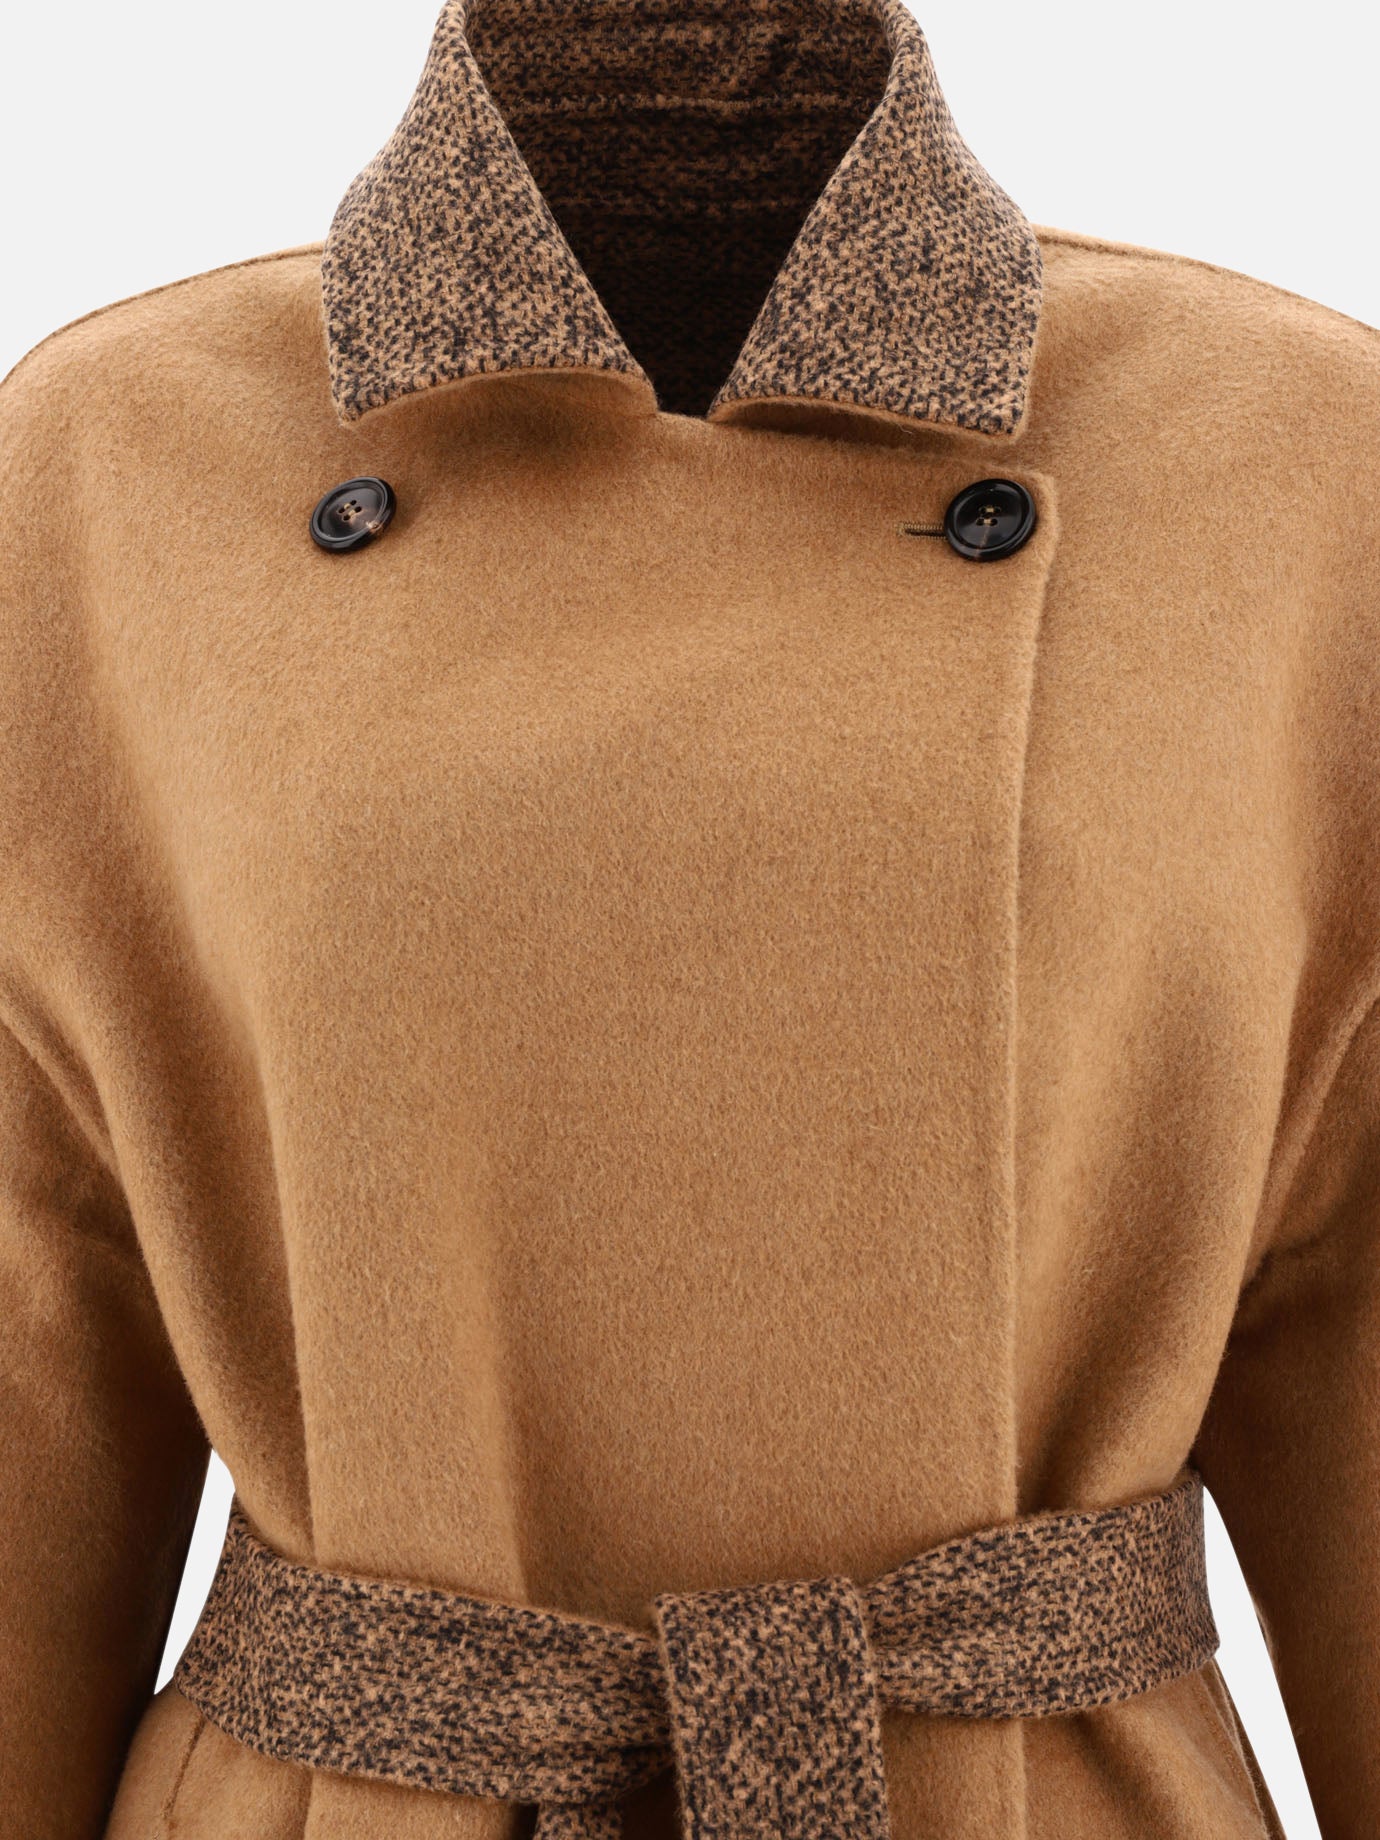 "Evelin" reversible camel and wool coat